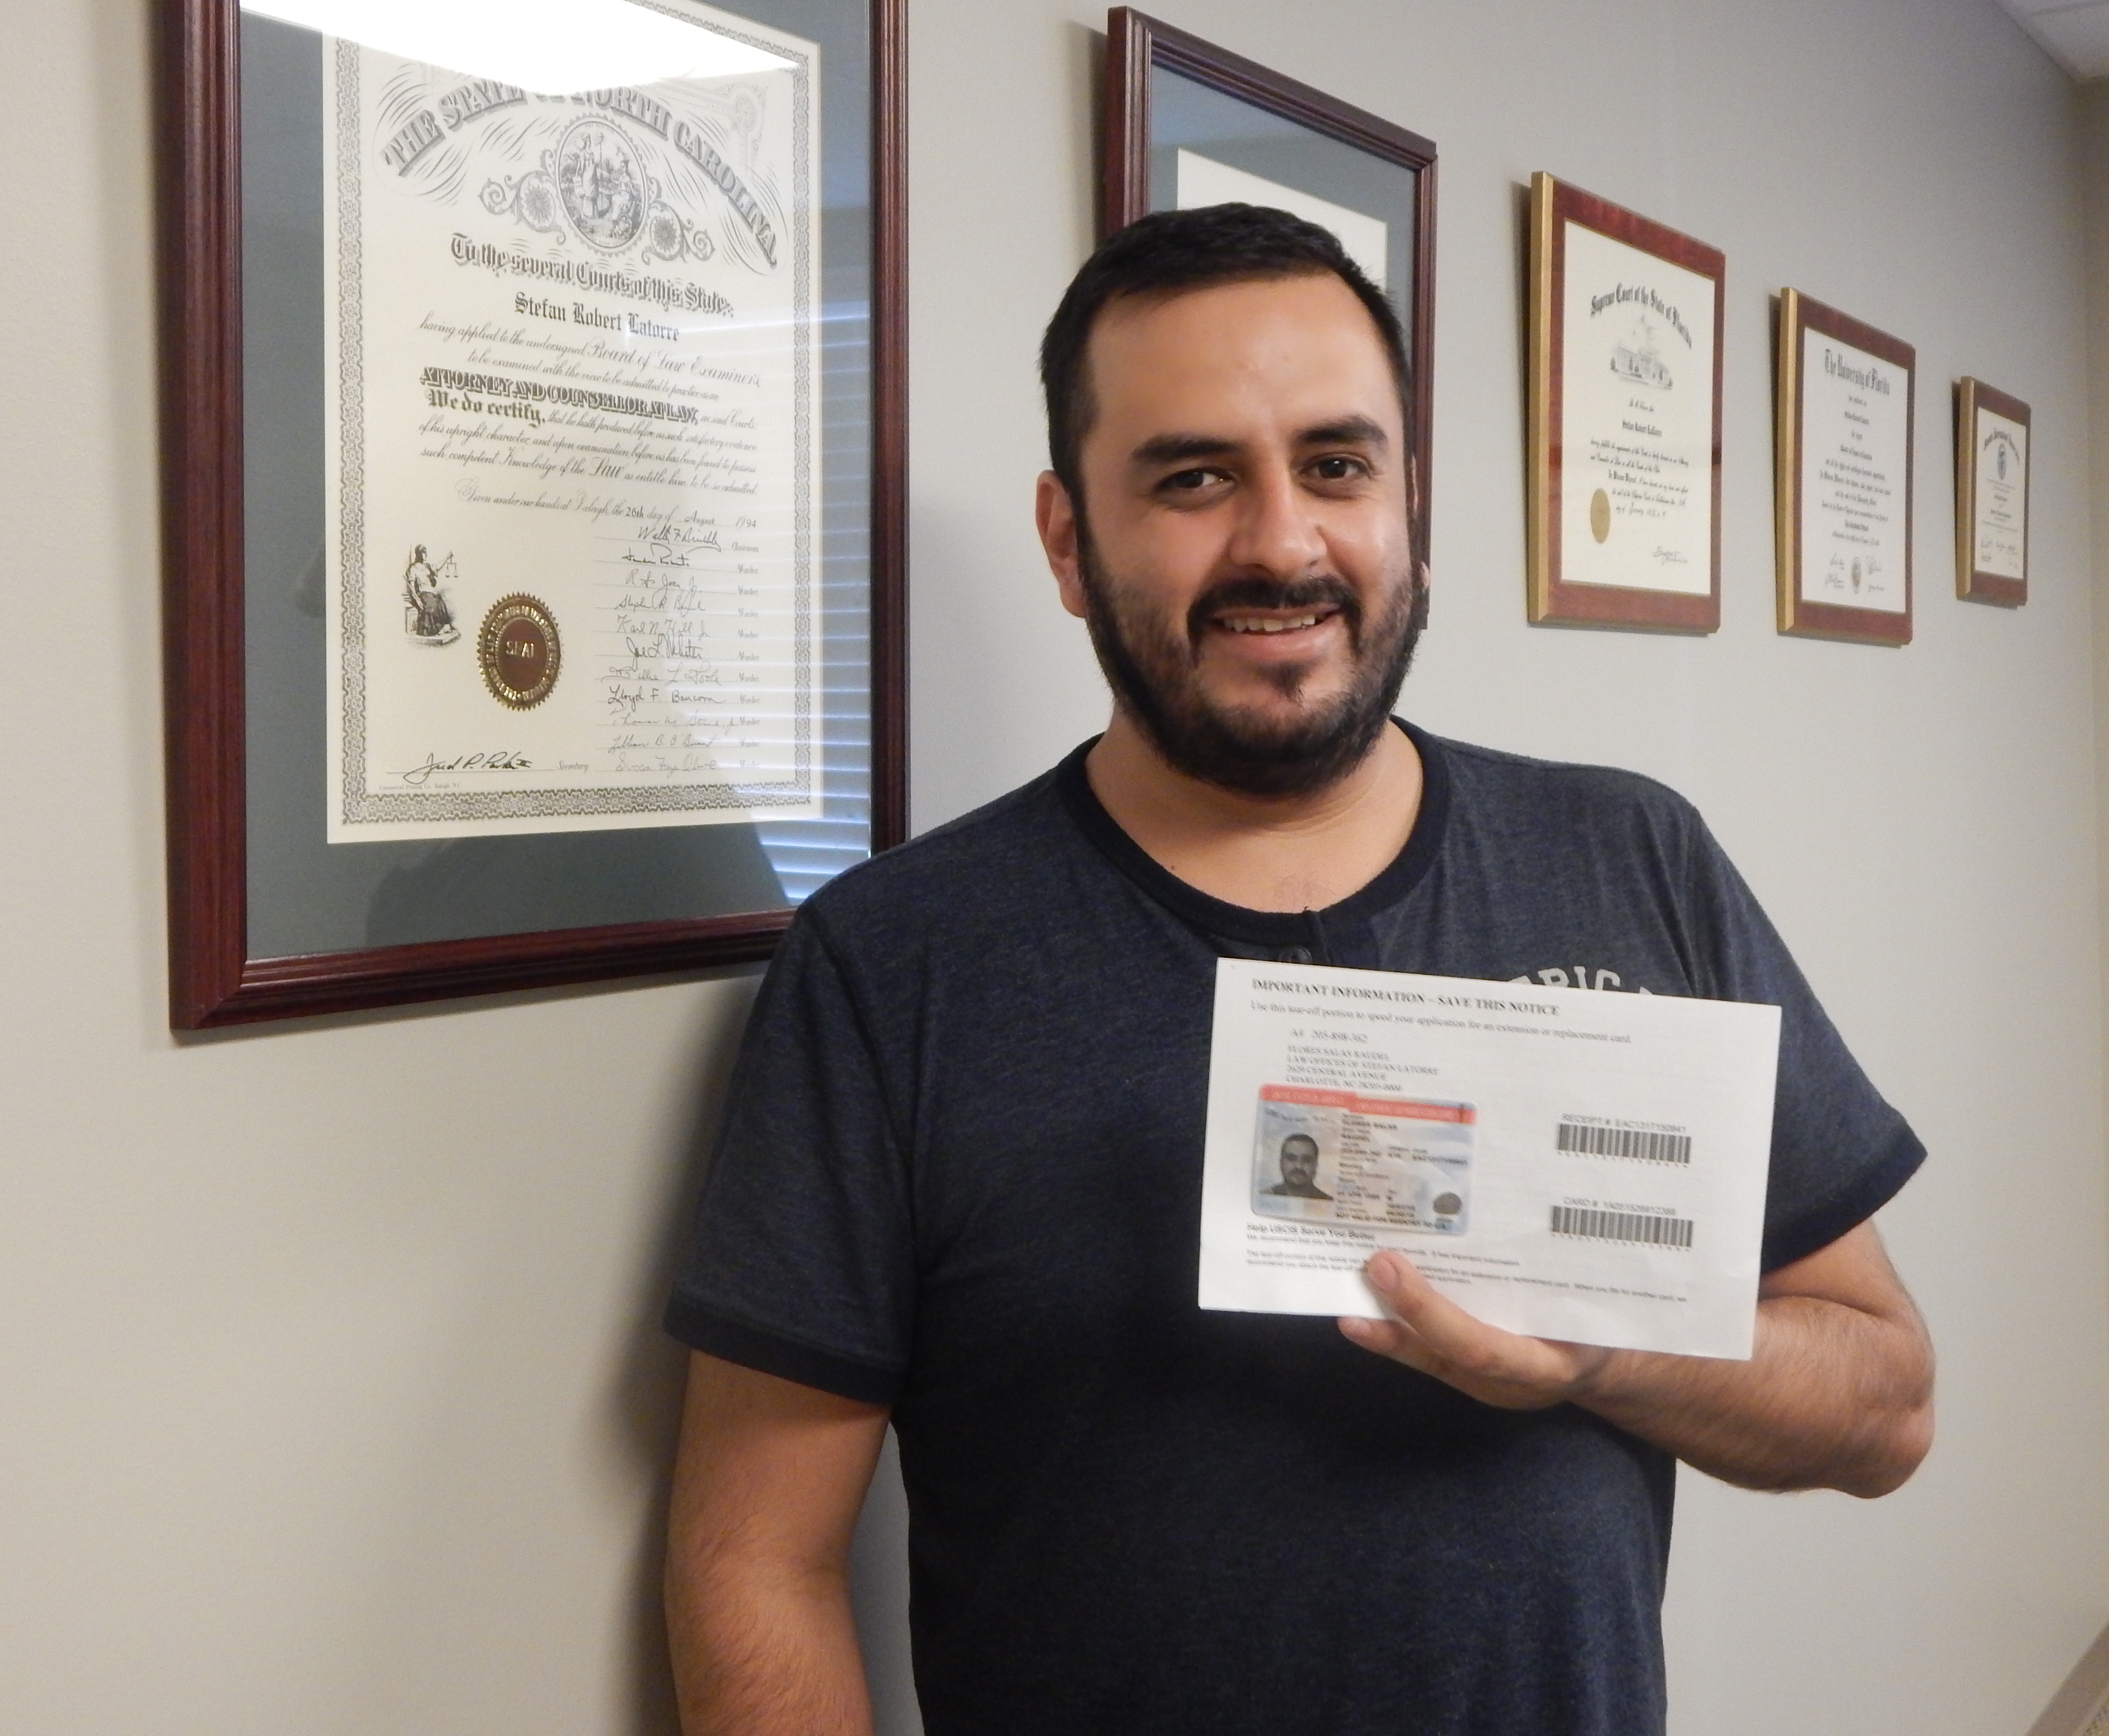 Raudel Florez, received his Visa U. His goal now is to travel back to Mexico.